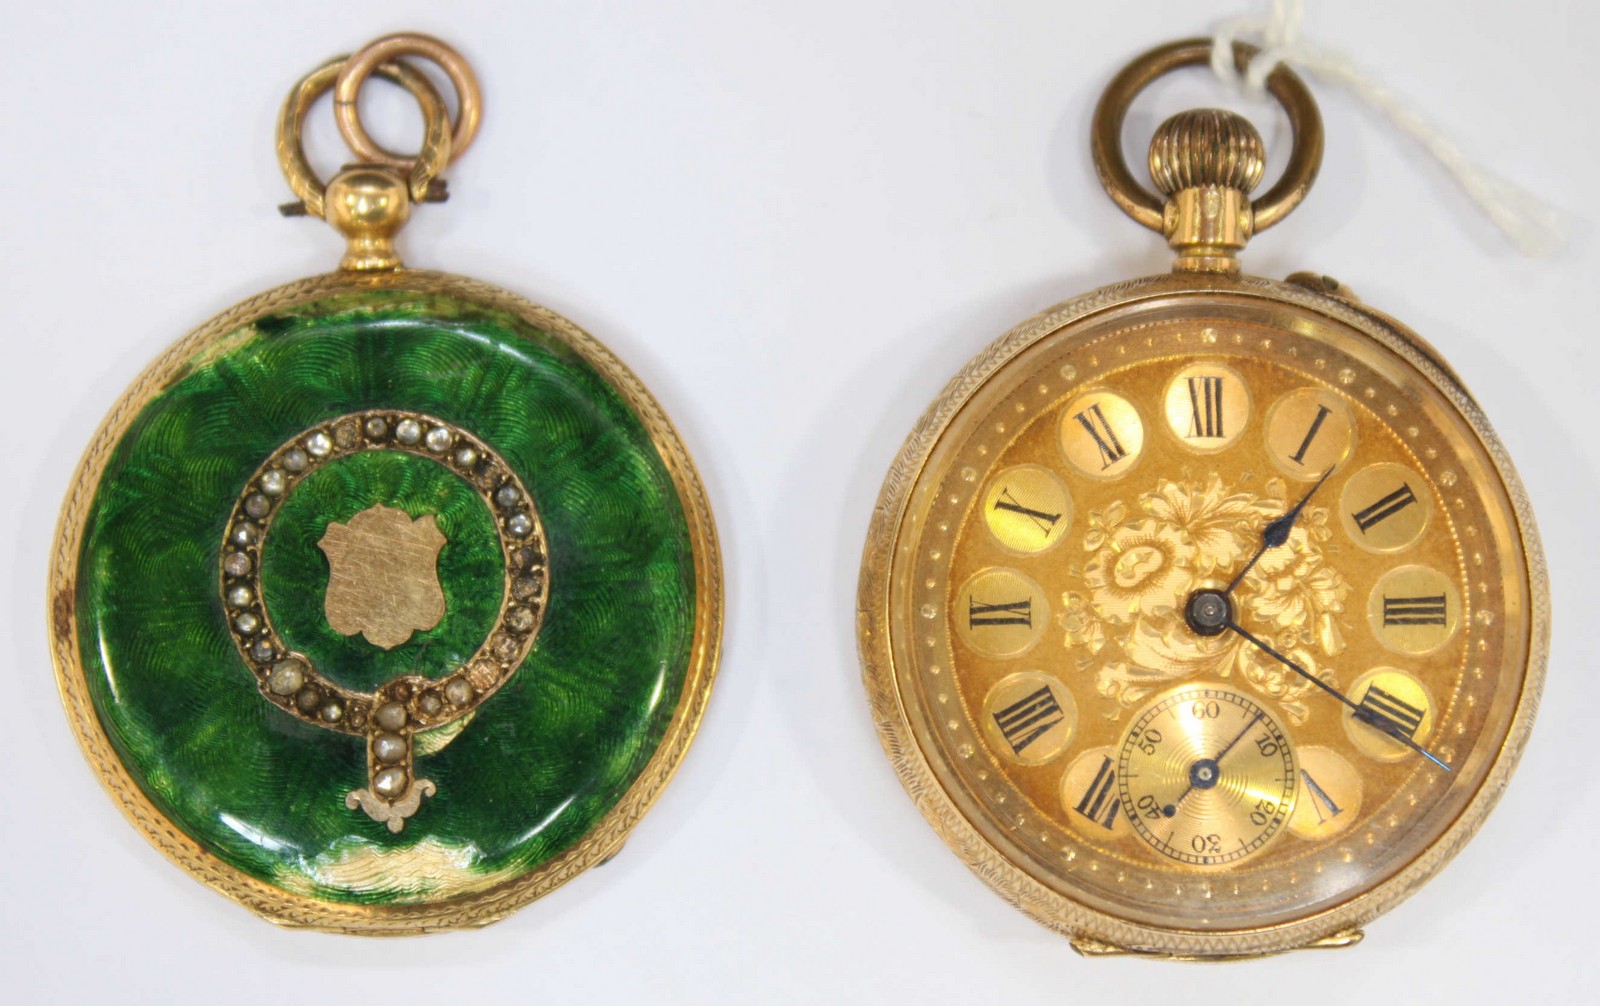 A ladies small 18K fob watch with gilt dial and black Roman numerals. Total weight: 31.2 grams.